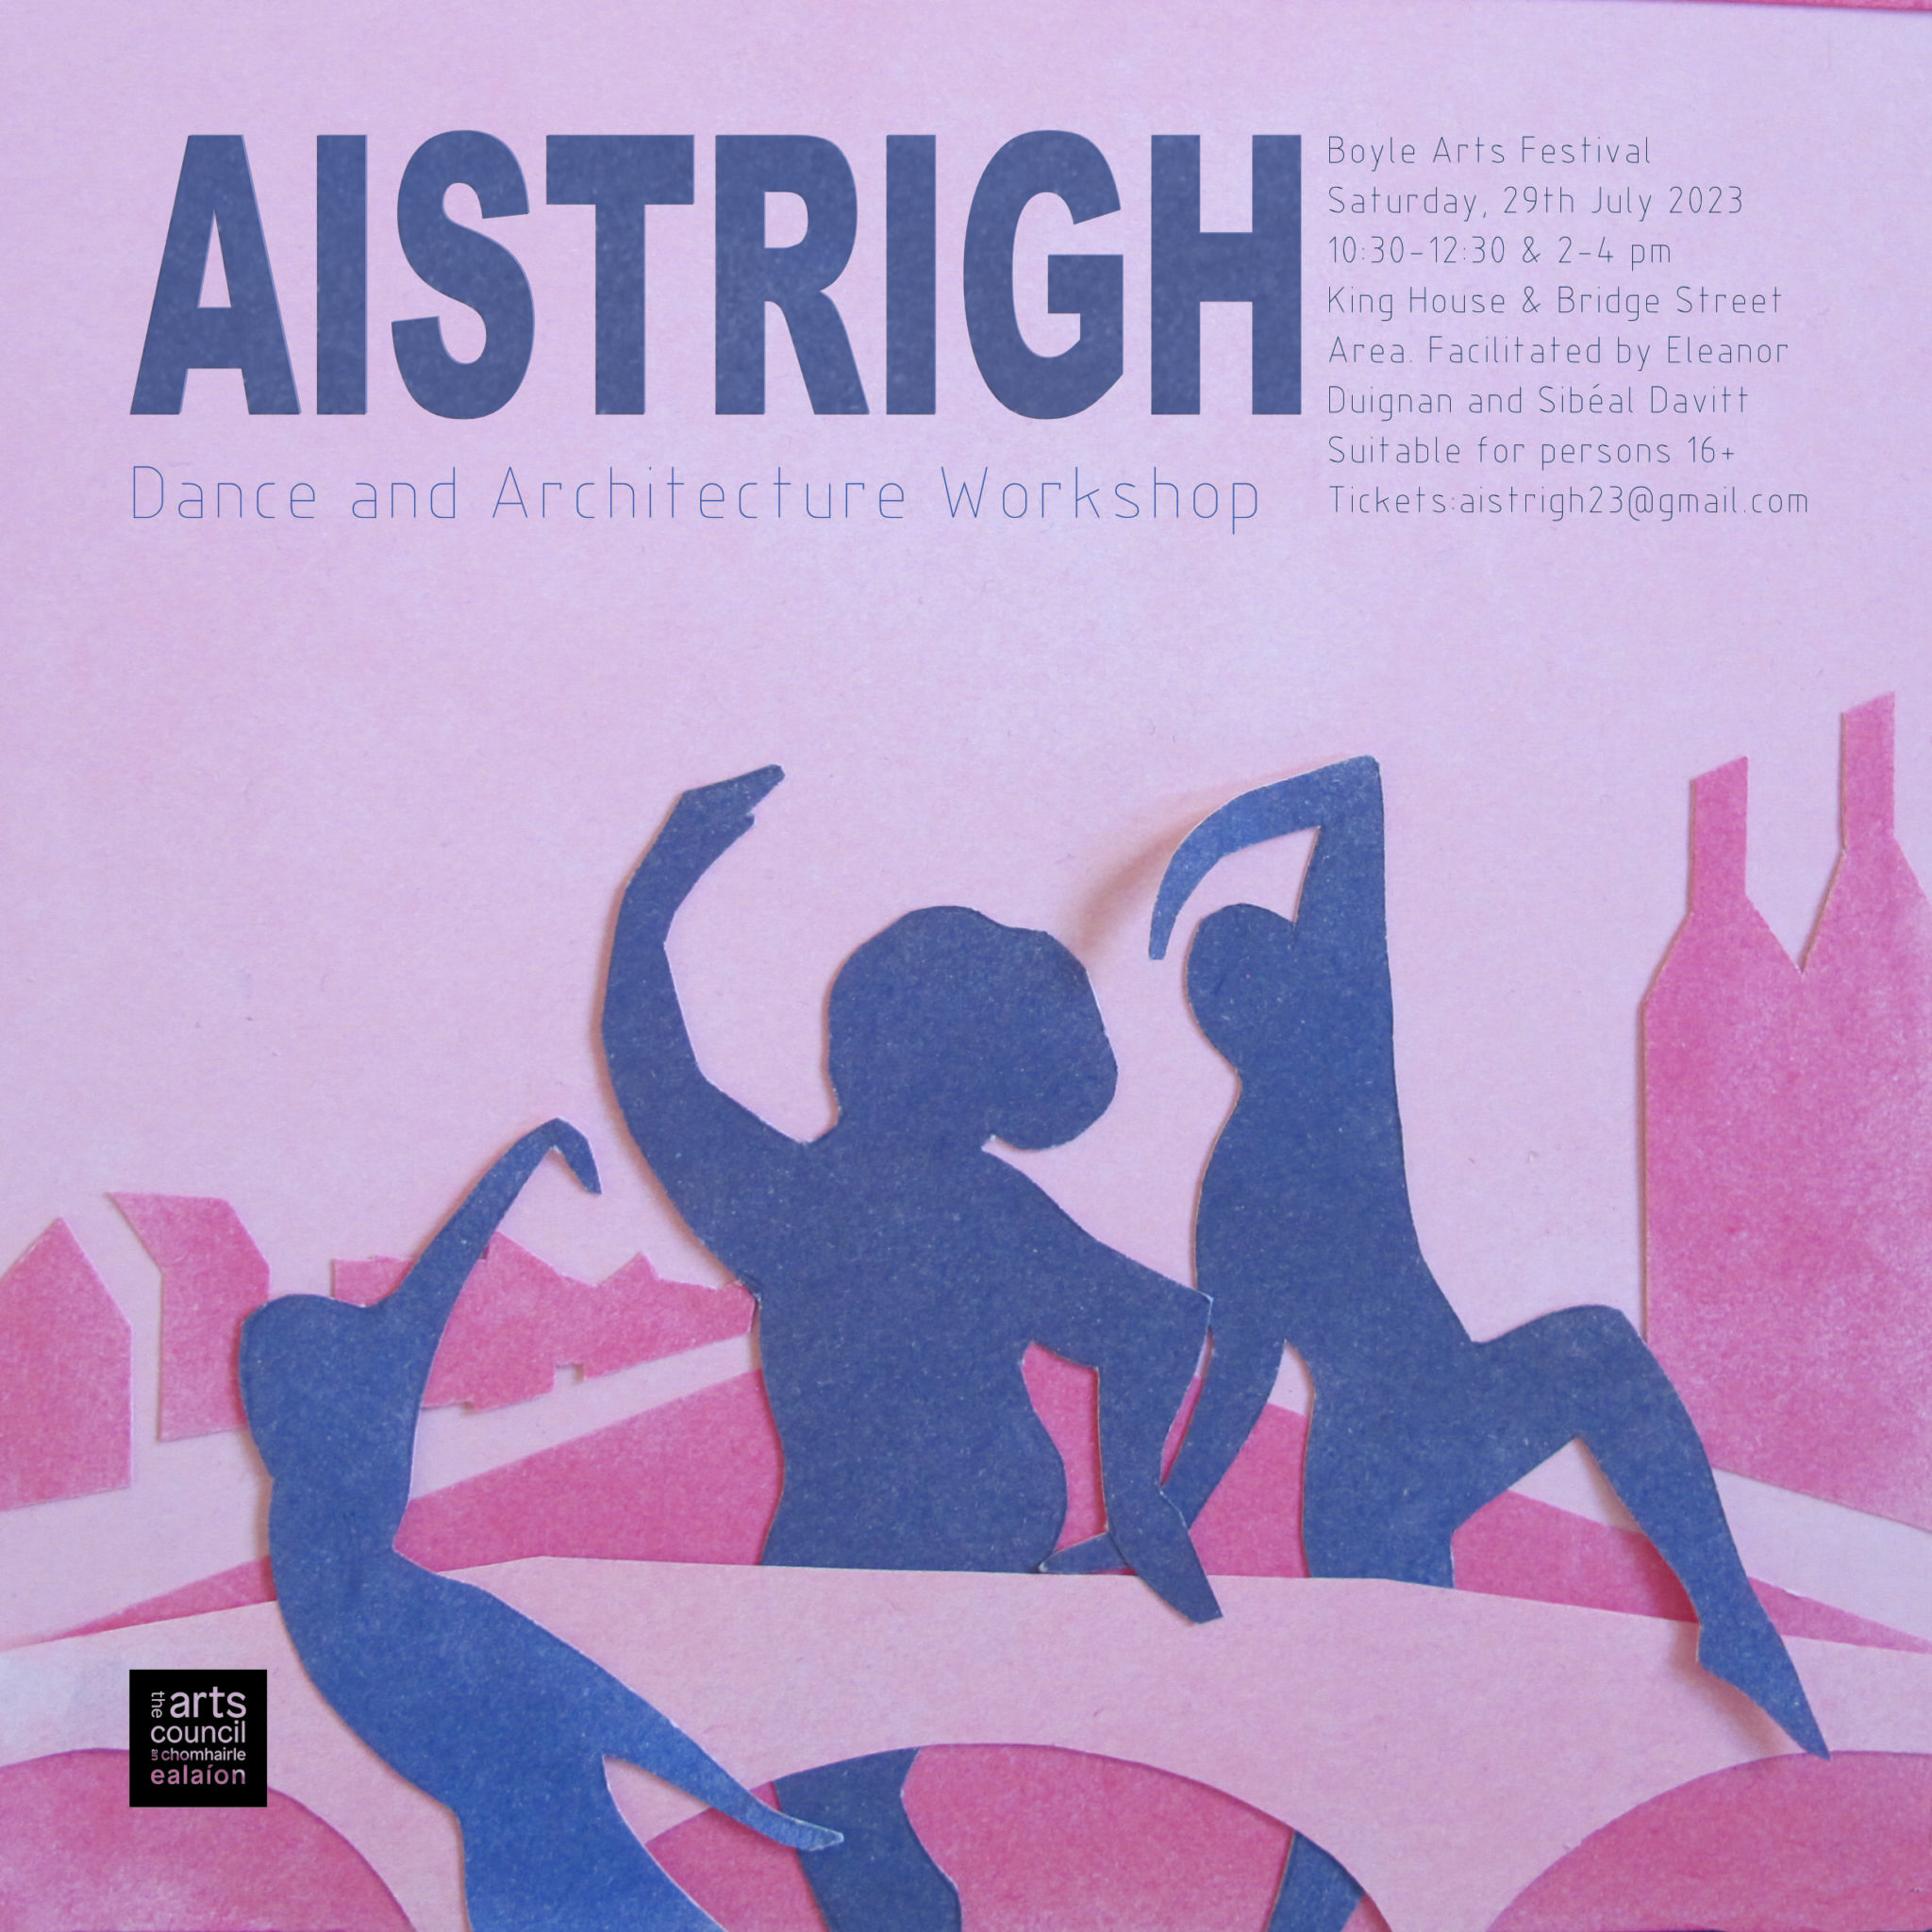 Aistrigh Dance and Architecture Workshop